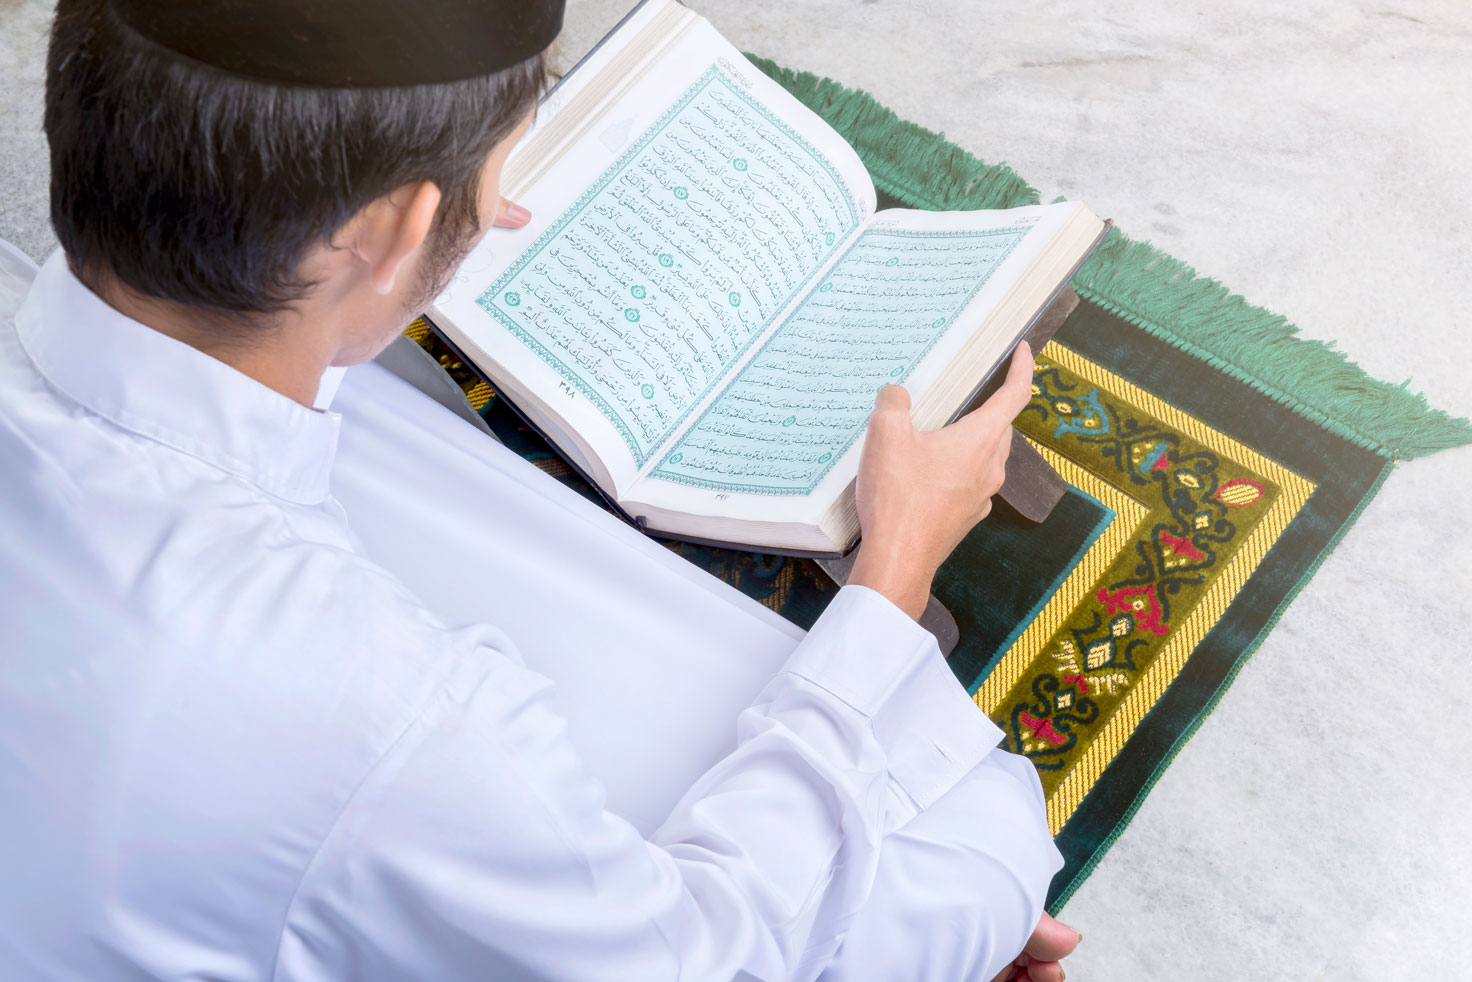 Learn Quran Reading Basics Online Course in the Arabian Tongue